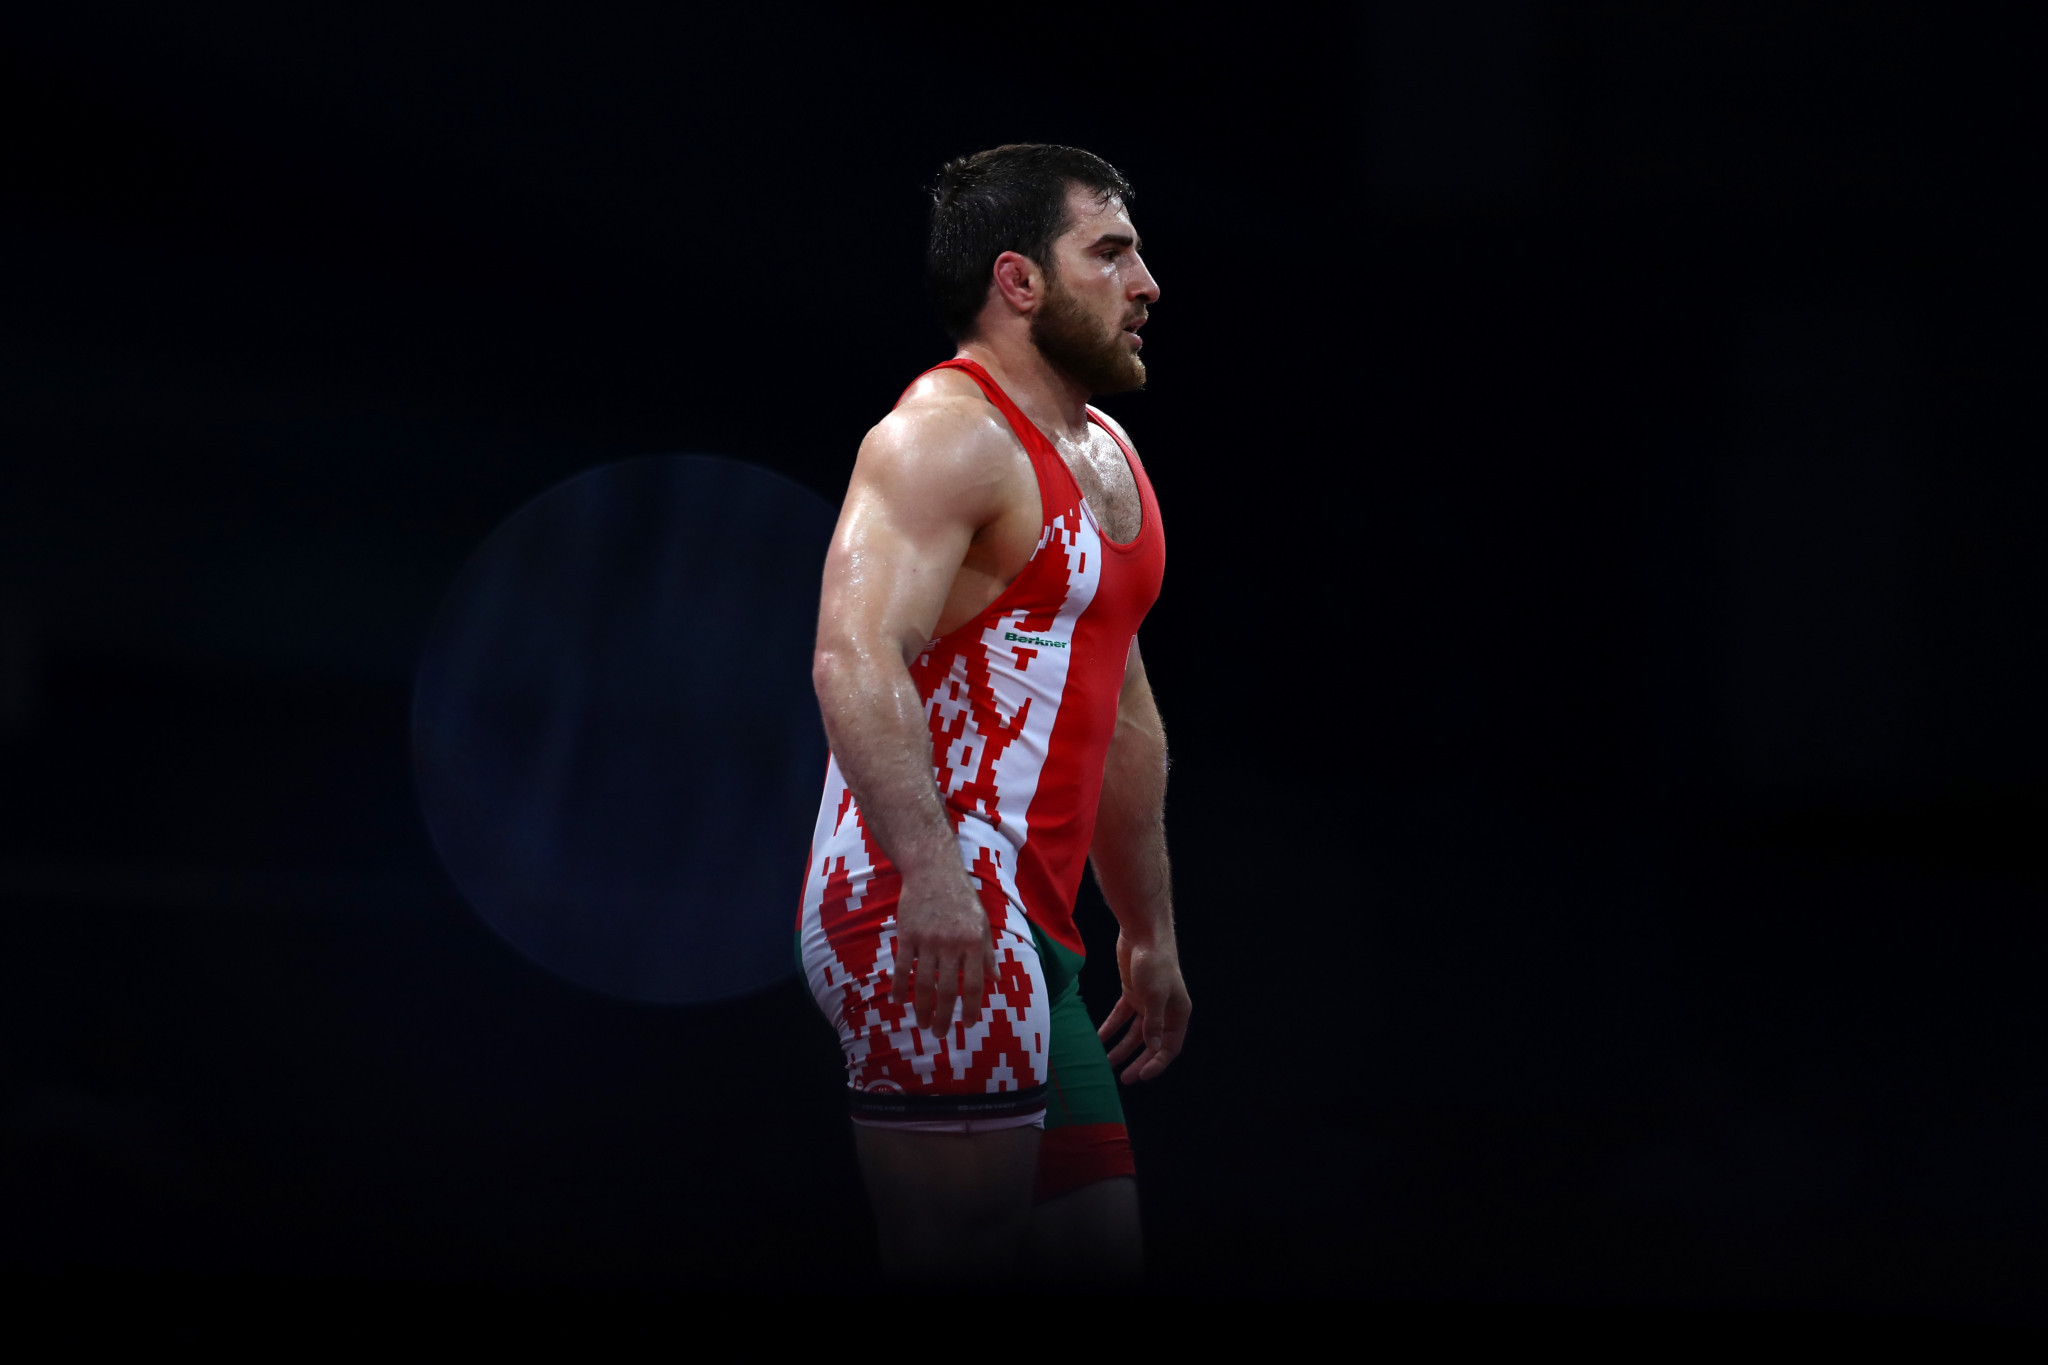 Ali Shabanau of Belarus was one of 12 wrestlers to book places at the Tokyo 2020 Olympic Games on day one of the European qualification event in Hungary ©Getty Images